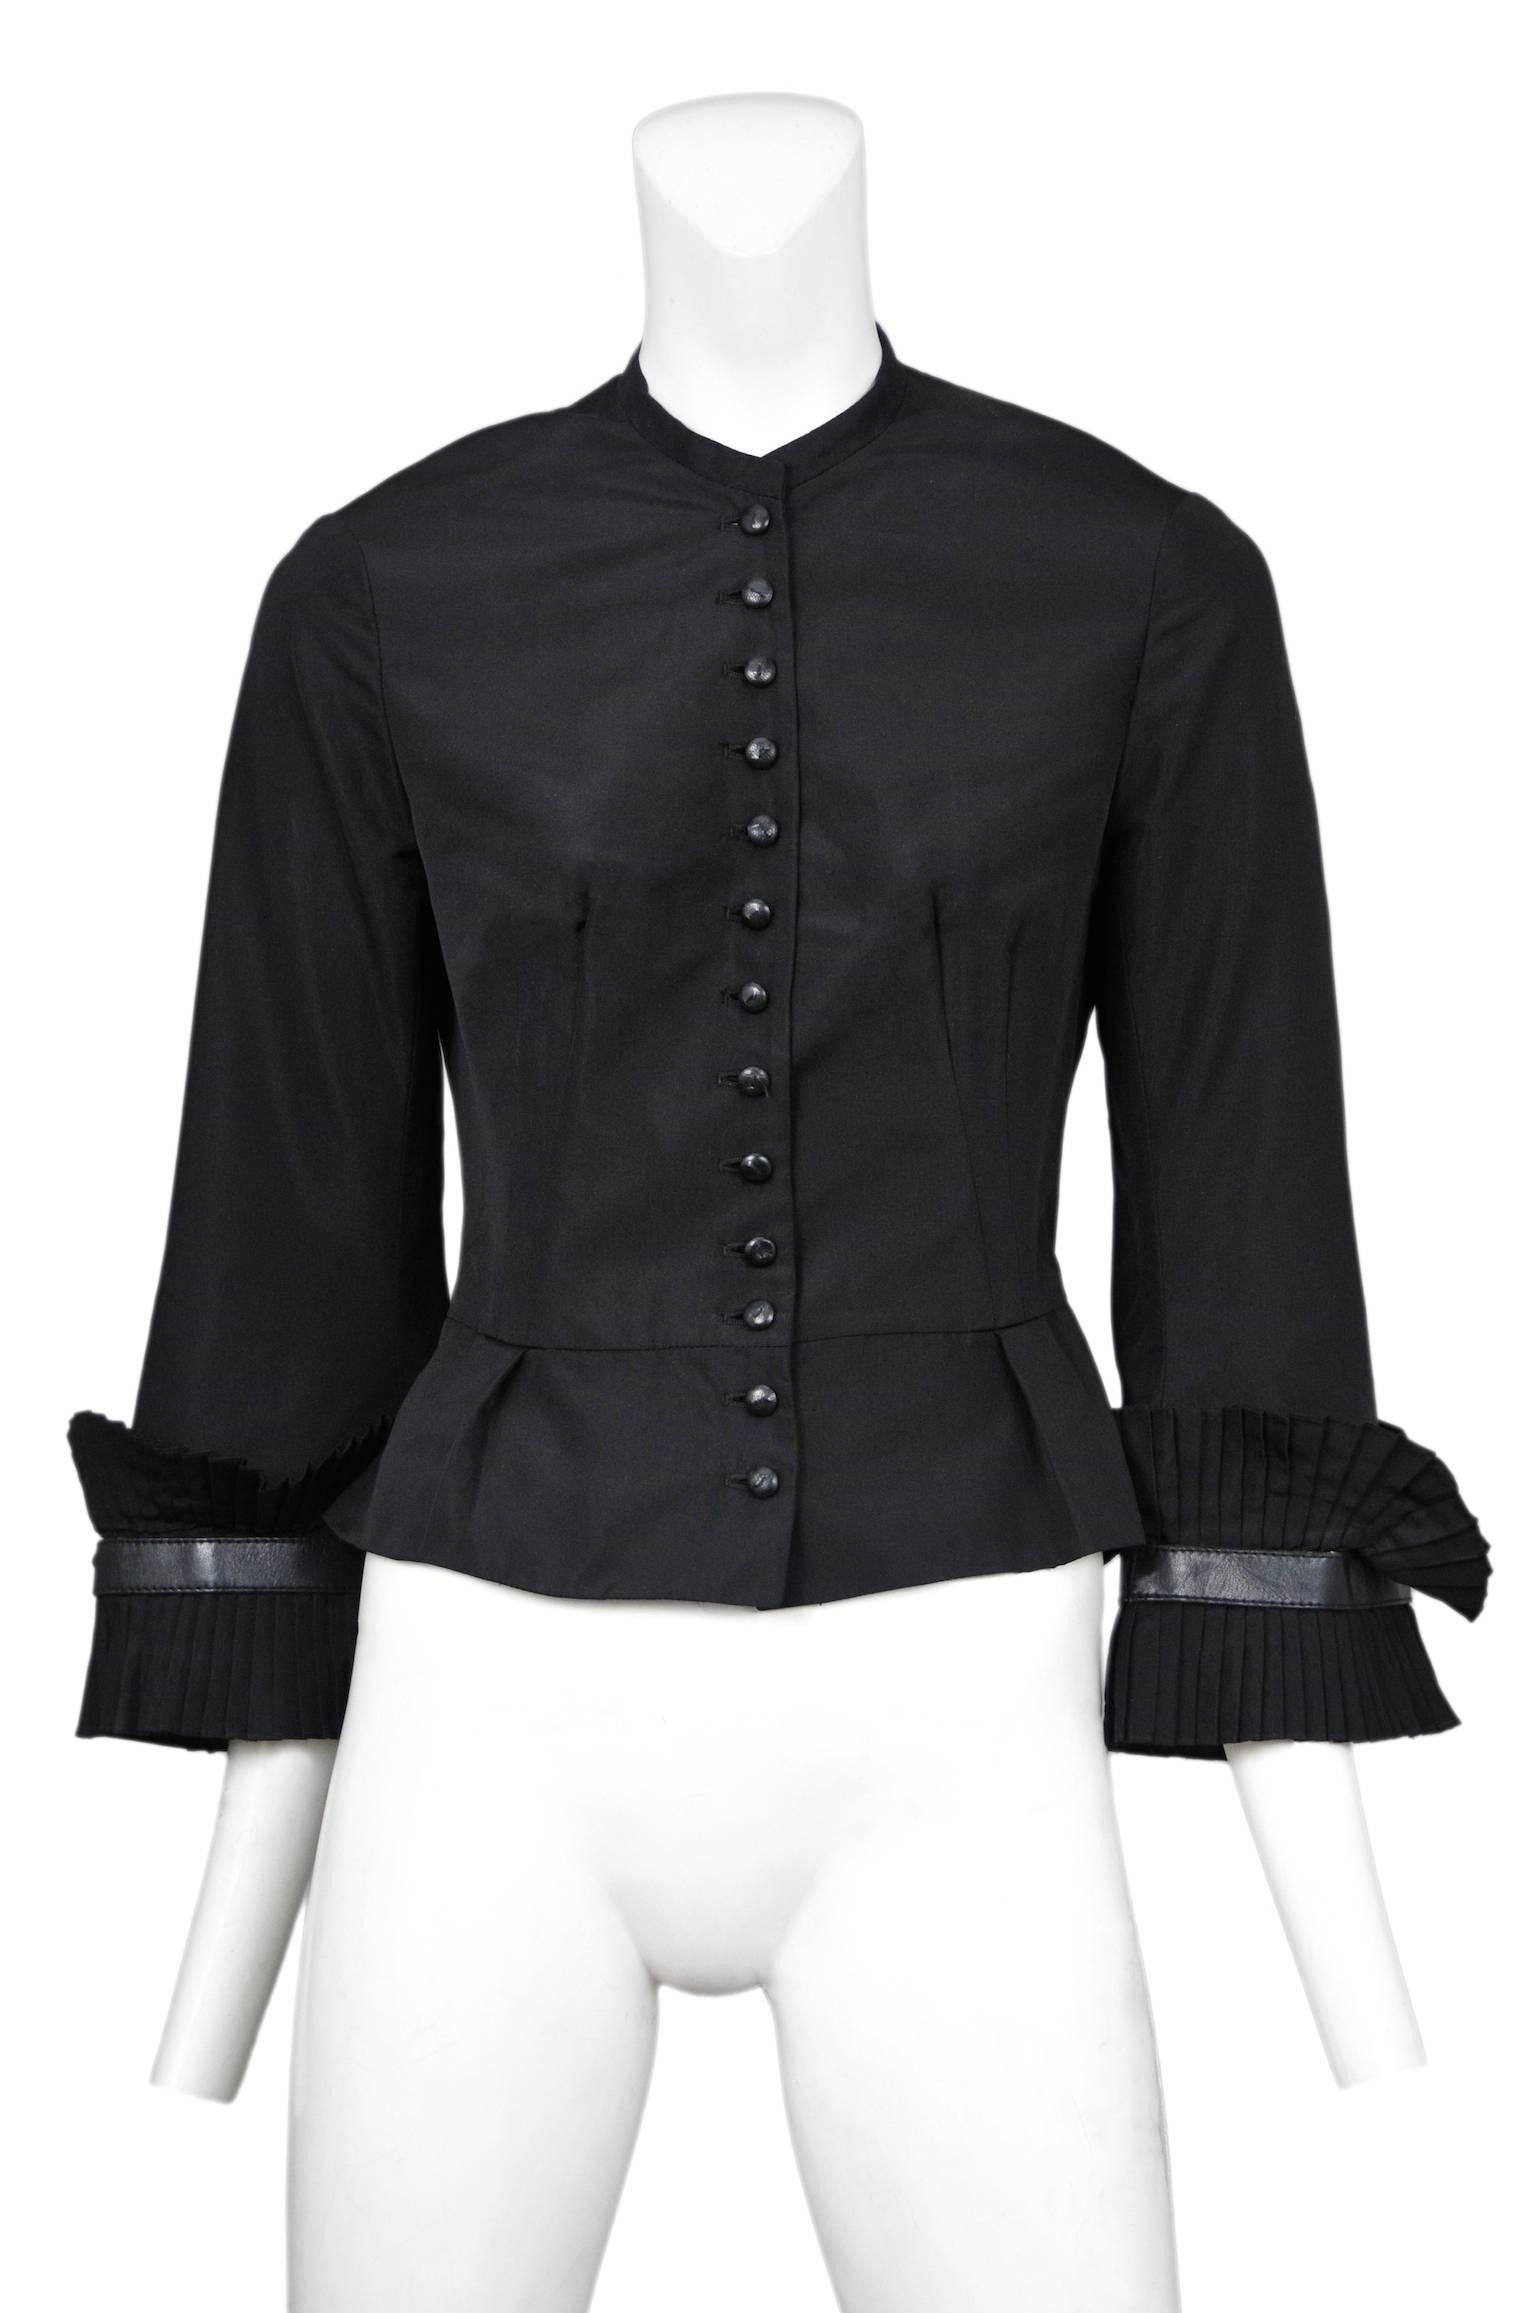 Vintage Alexander McQueen fitted black taffeta jacket with pleated sleeve trim and 13 front buttons. From the Supercalifragilisticexpialidocious Autumn / Winter 2002 Collection.

Please contact us for more photographs. 